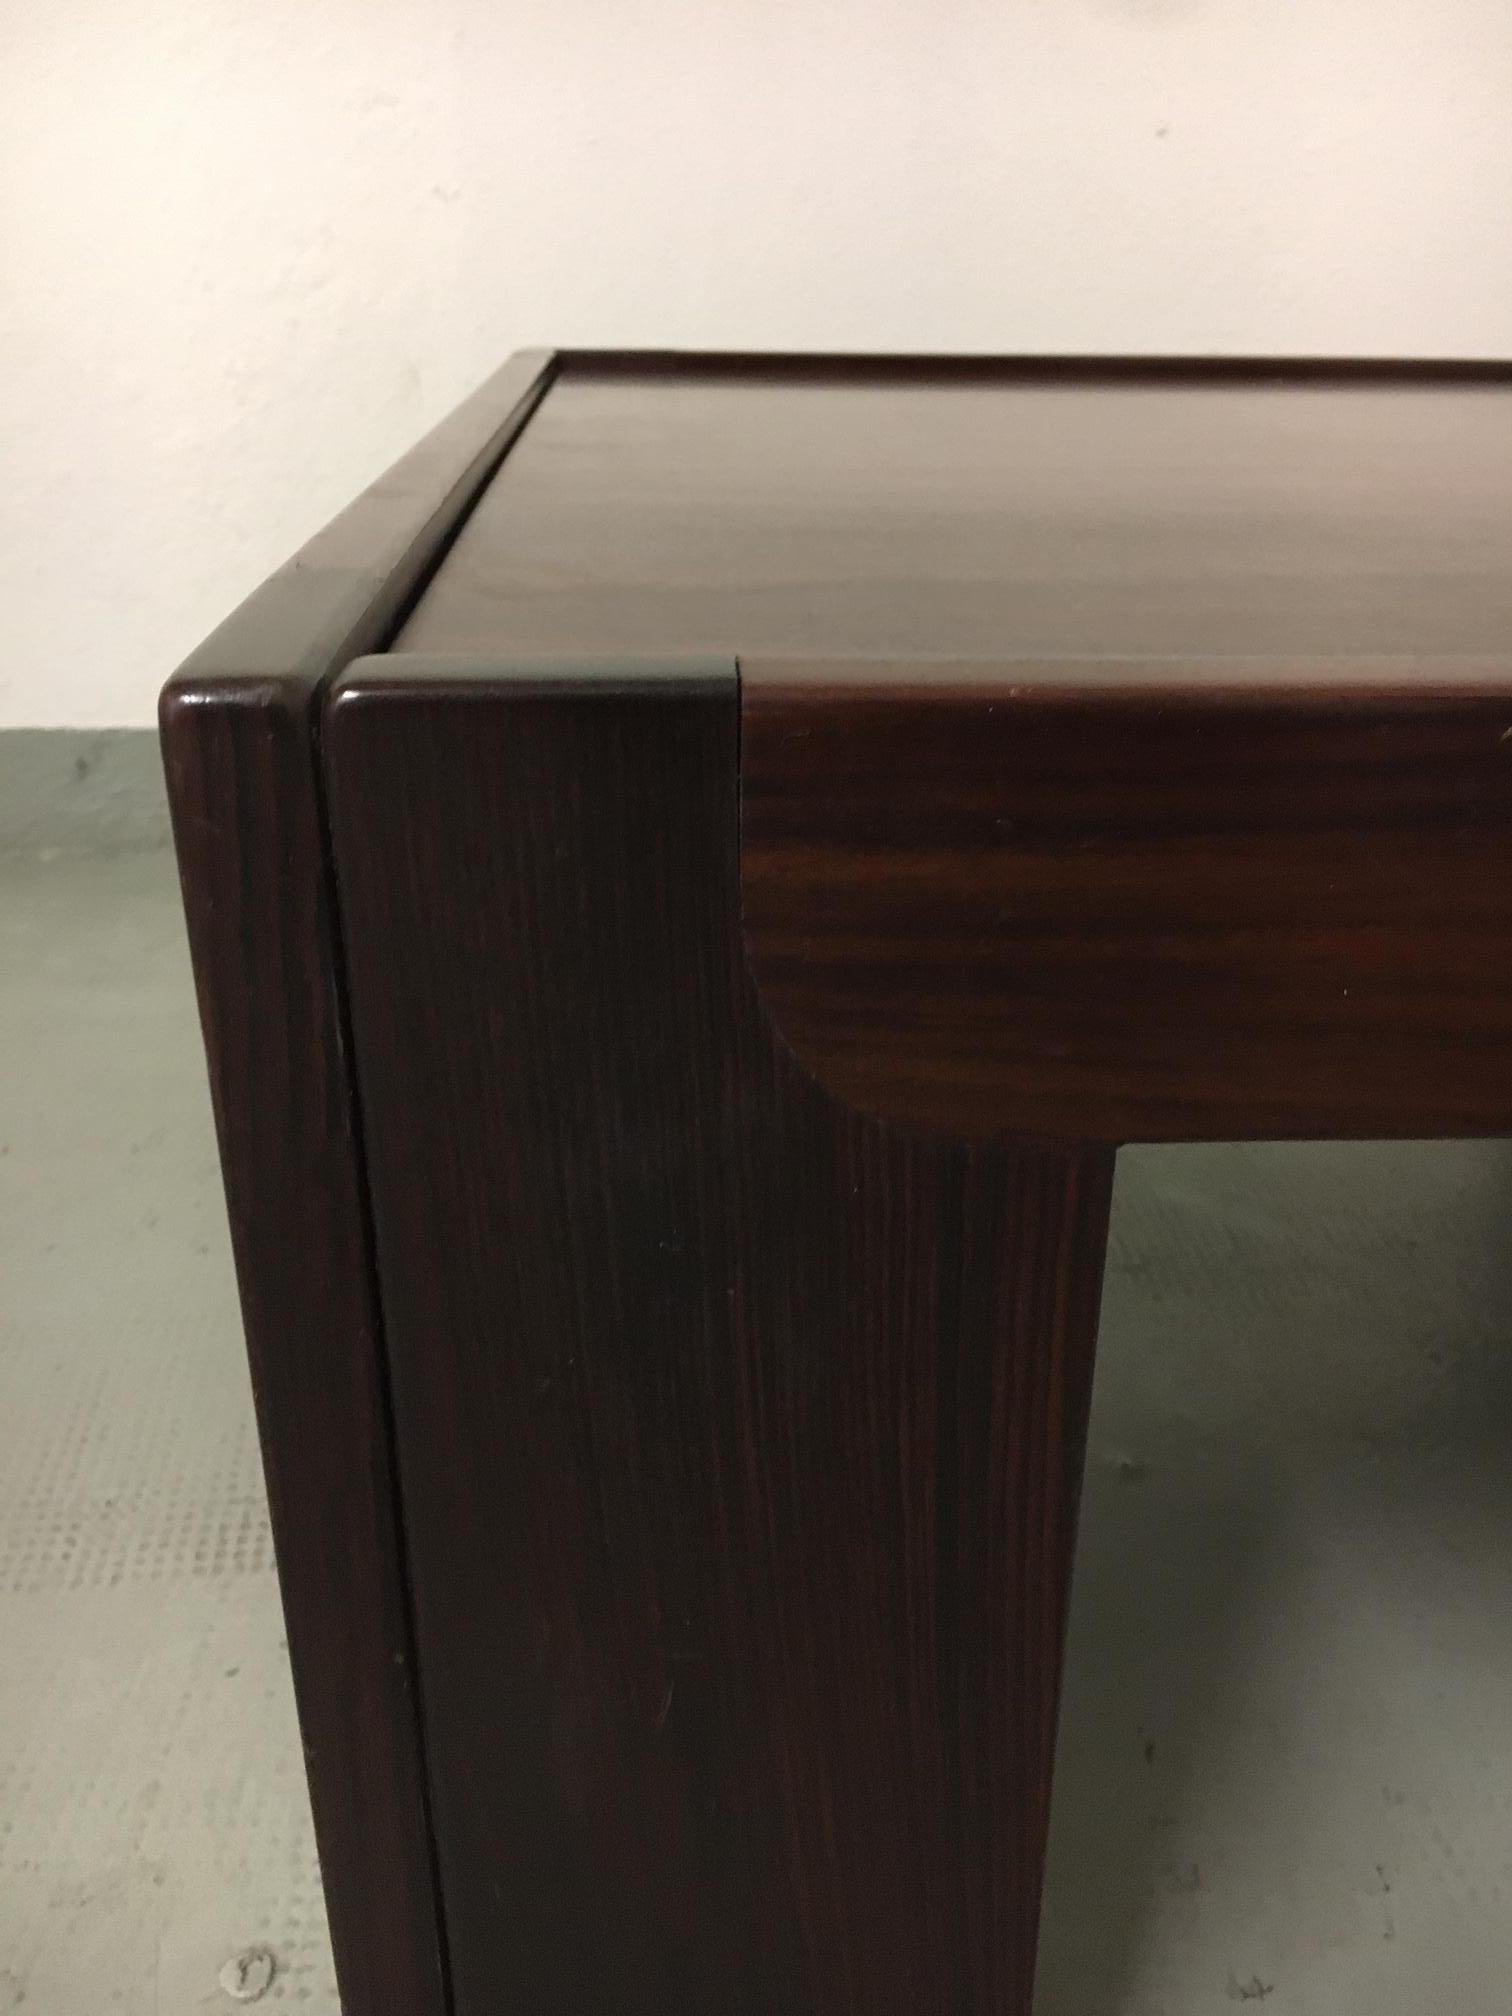 Afra & Tobia Scarpa Model 771 Rosewood Side Table Cassina, Italy, ca. 1965 For Sale 1